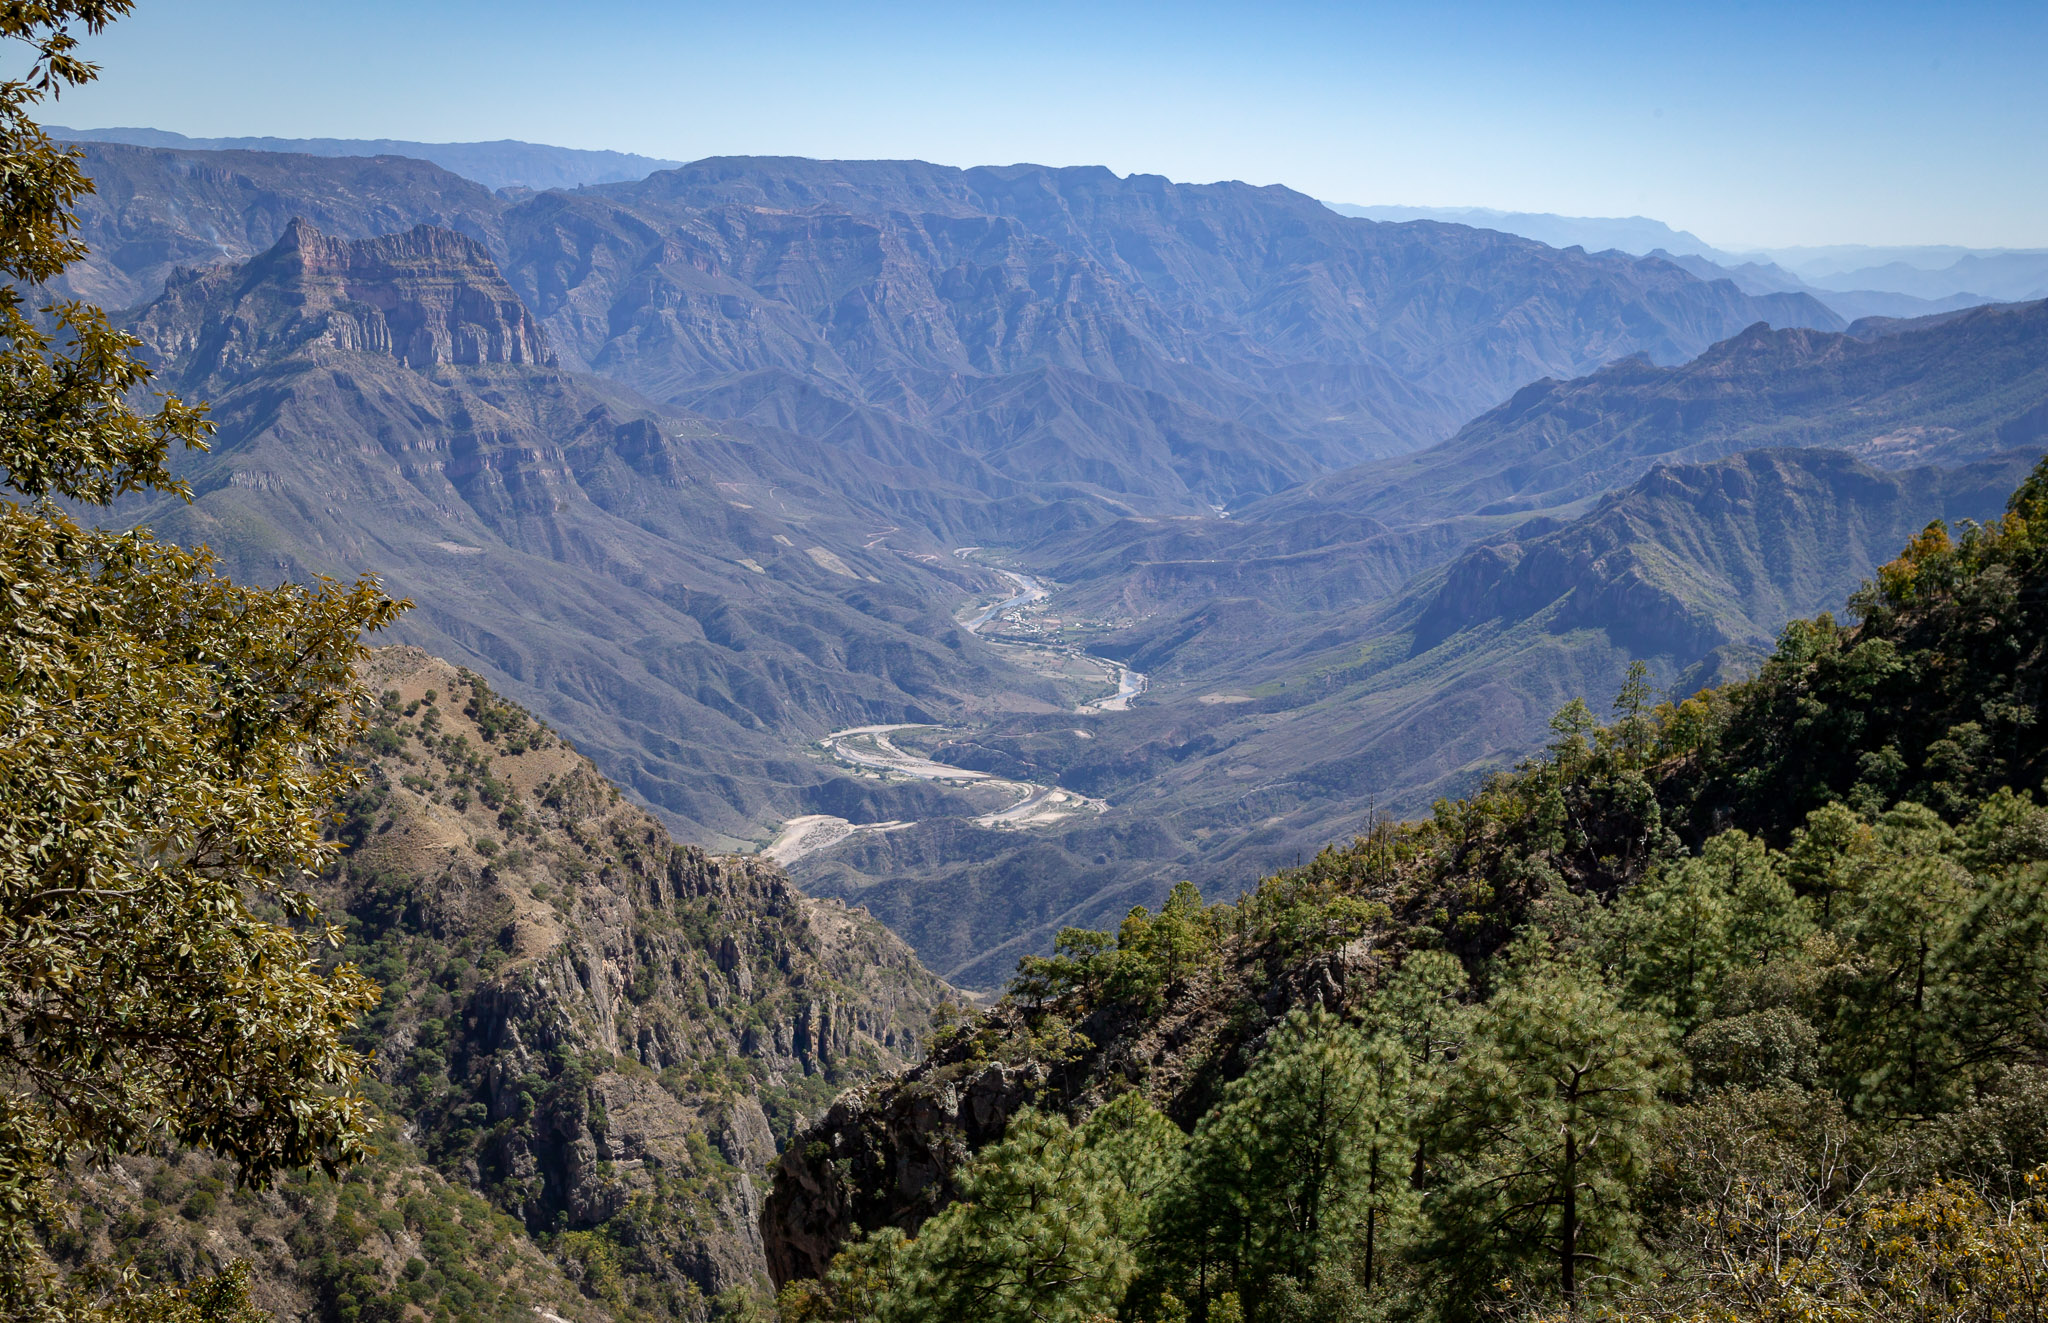 First Copper Canyon views over Urique